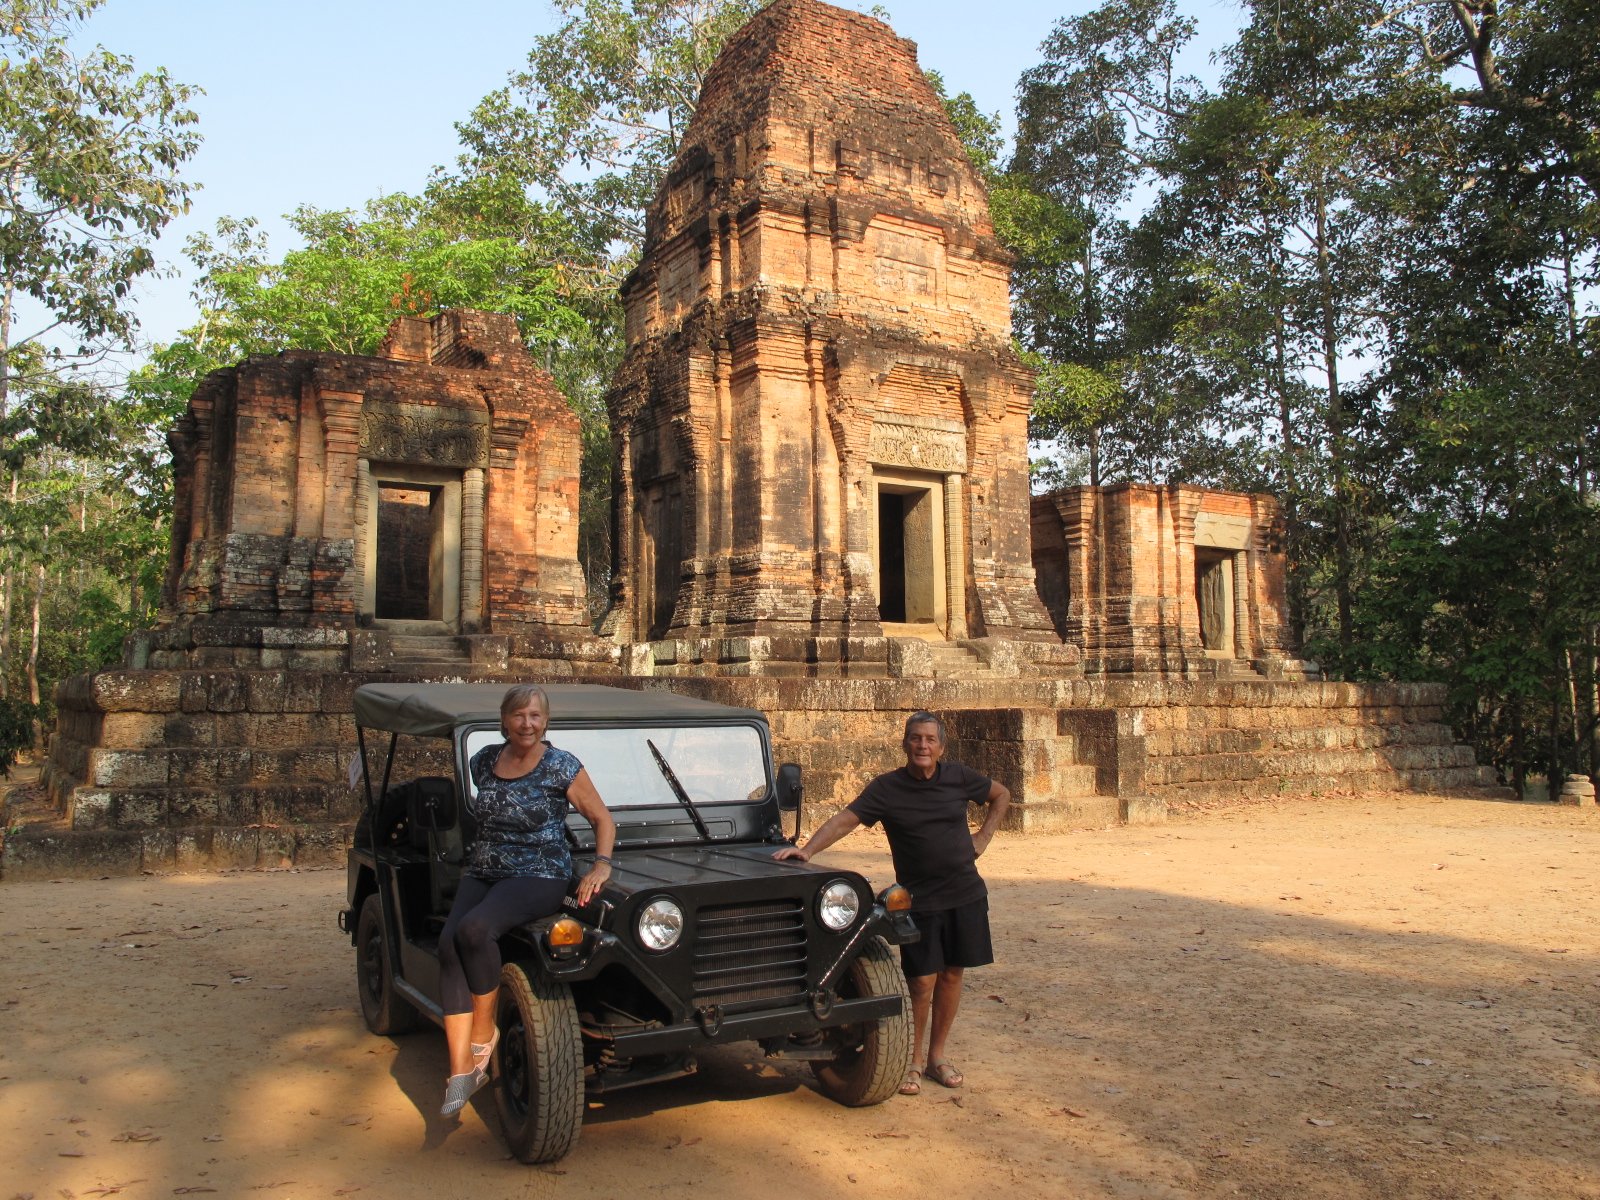 Angkor ‘Tomb Raider’ with an Archaeologist